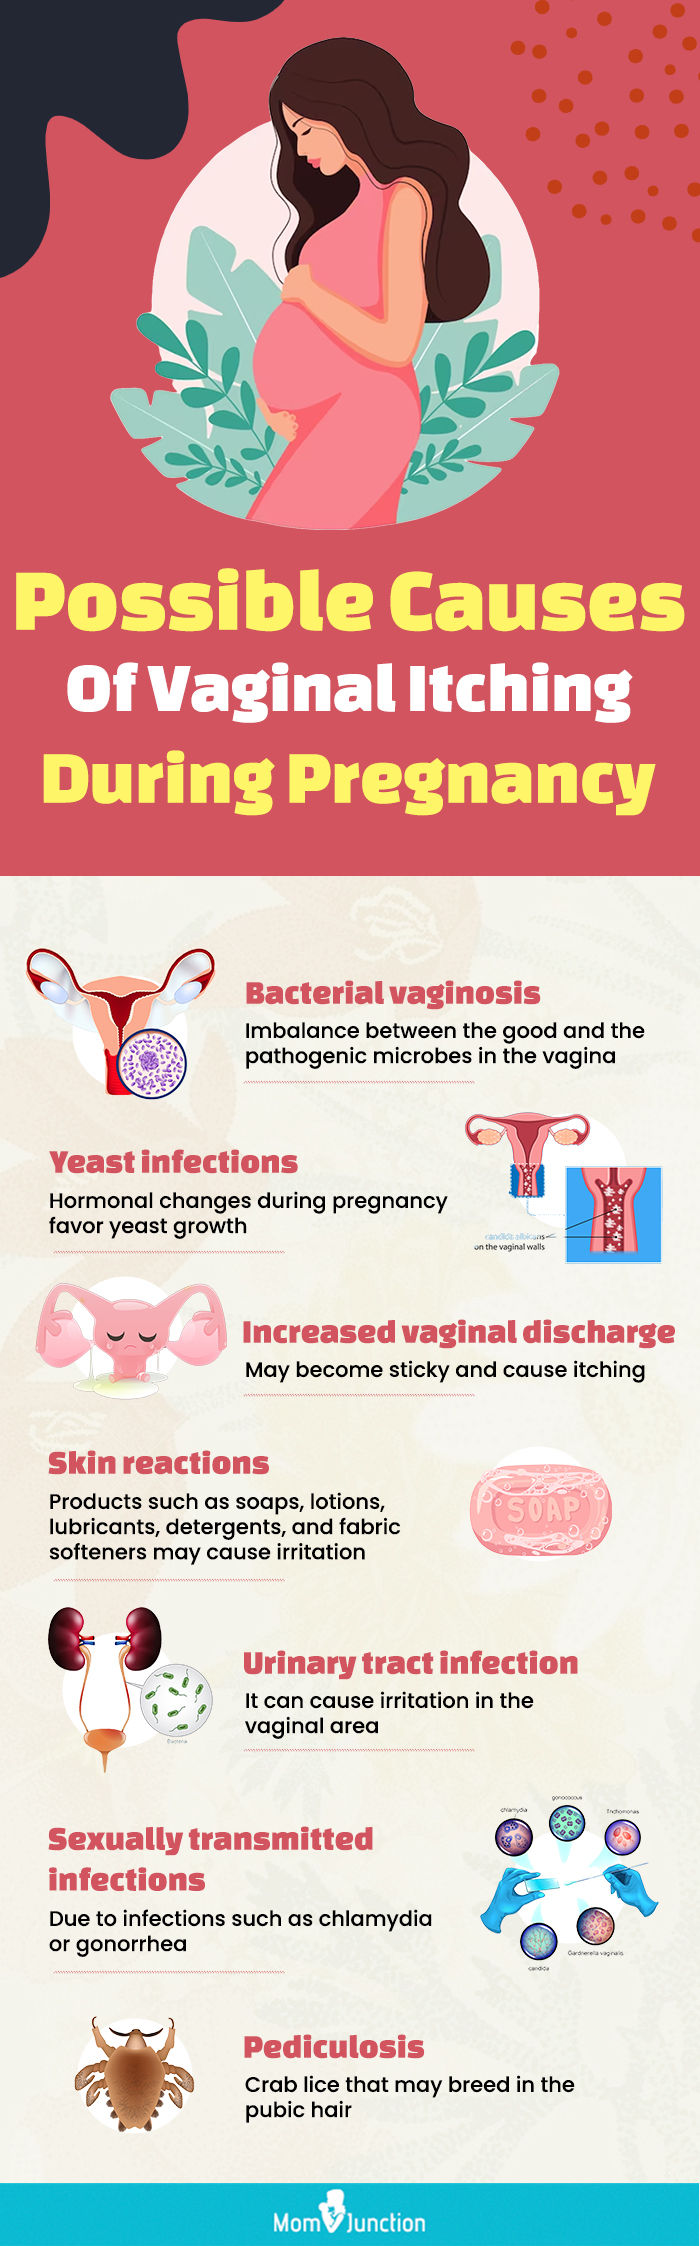 possible causes of vaginal itching during pregnancy (infographic)